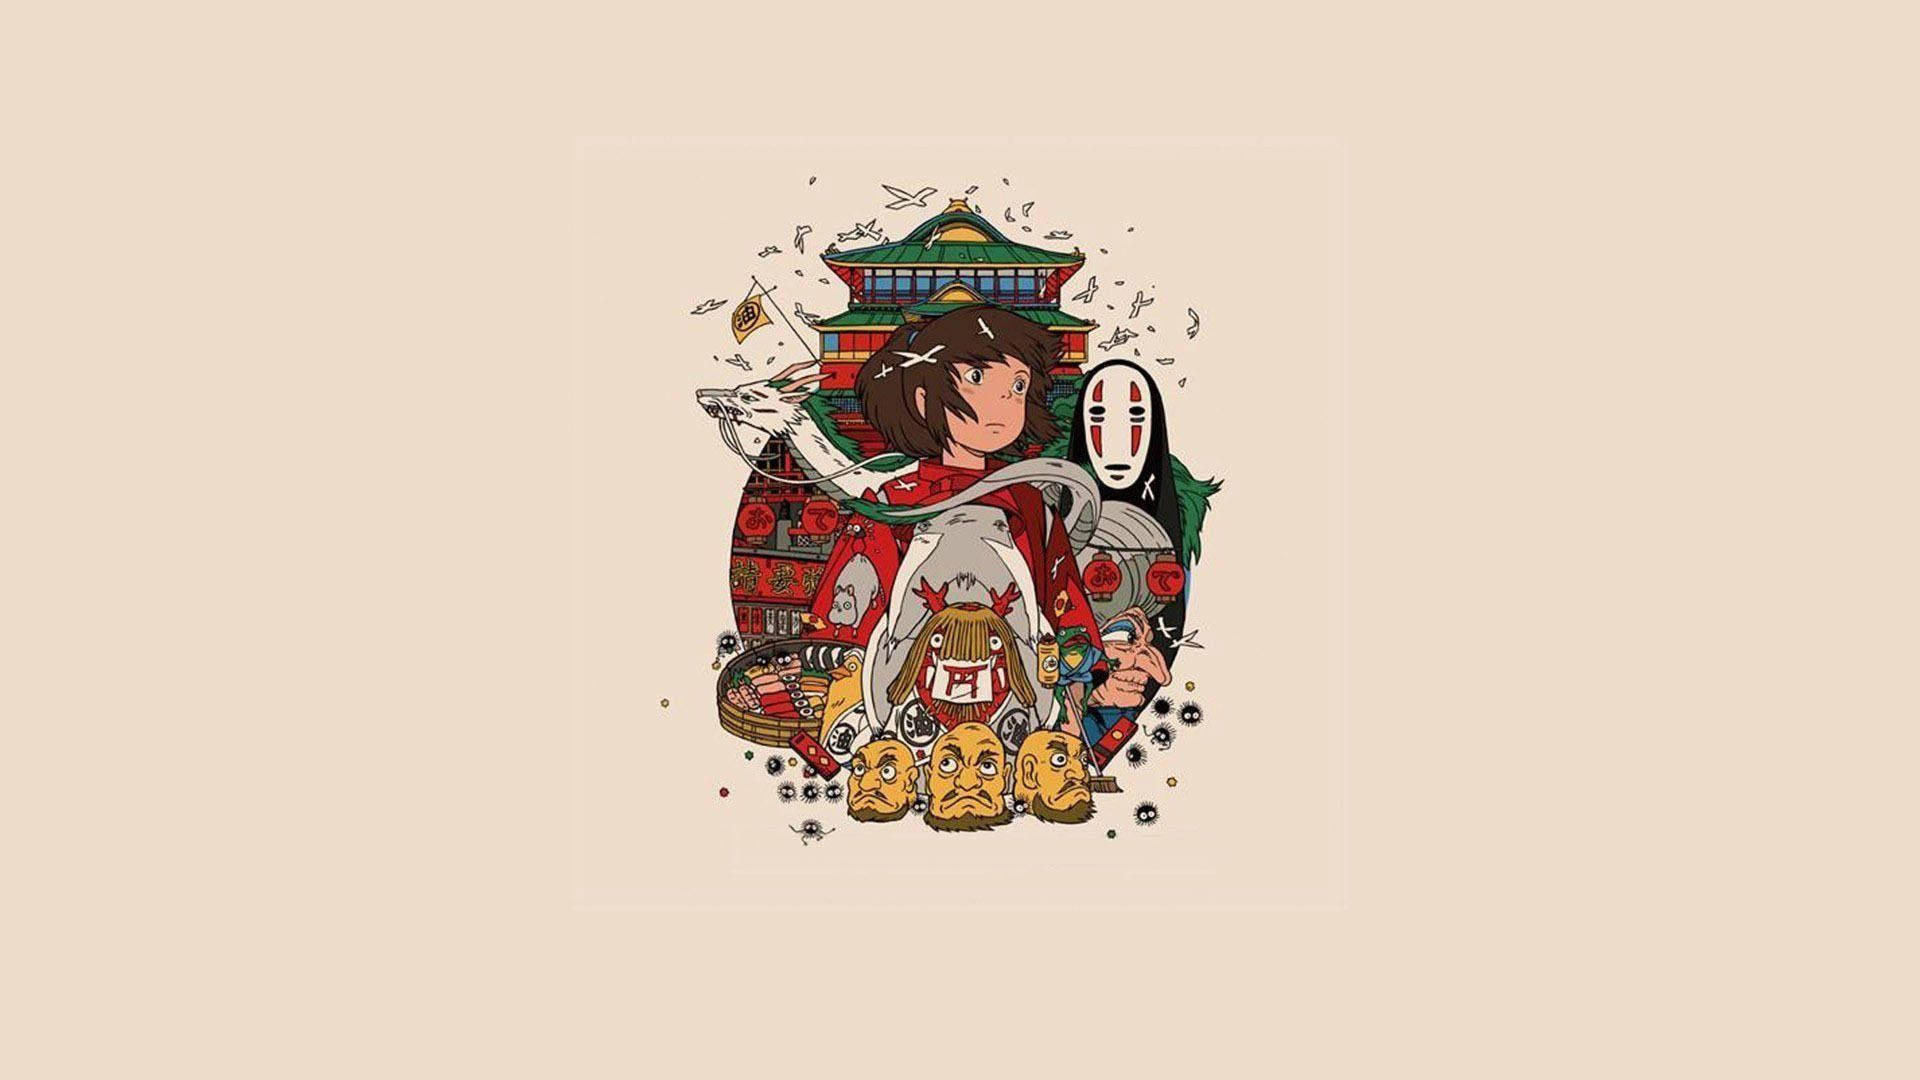 Abstract Illustration of the Classic Animation, Spirited Away Wallpaper